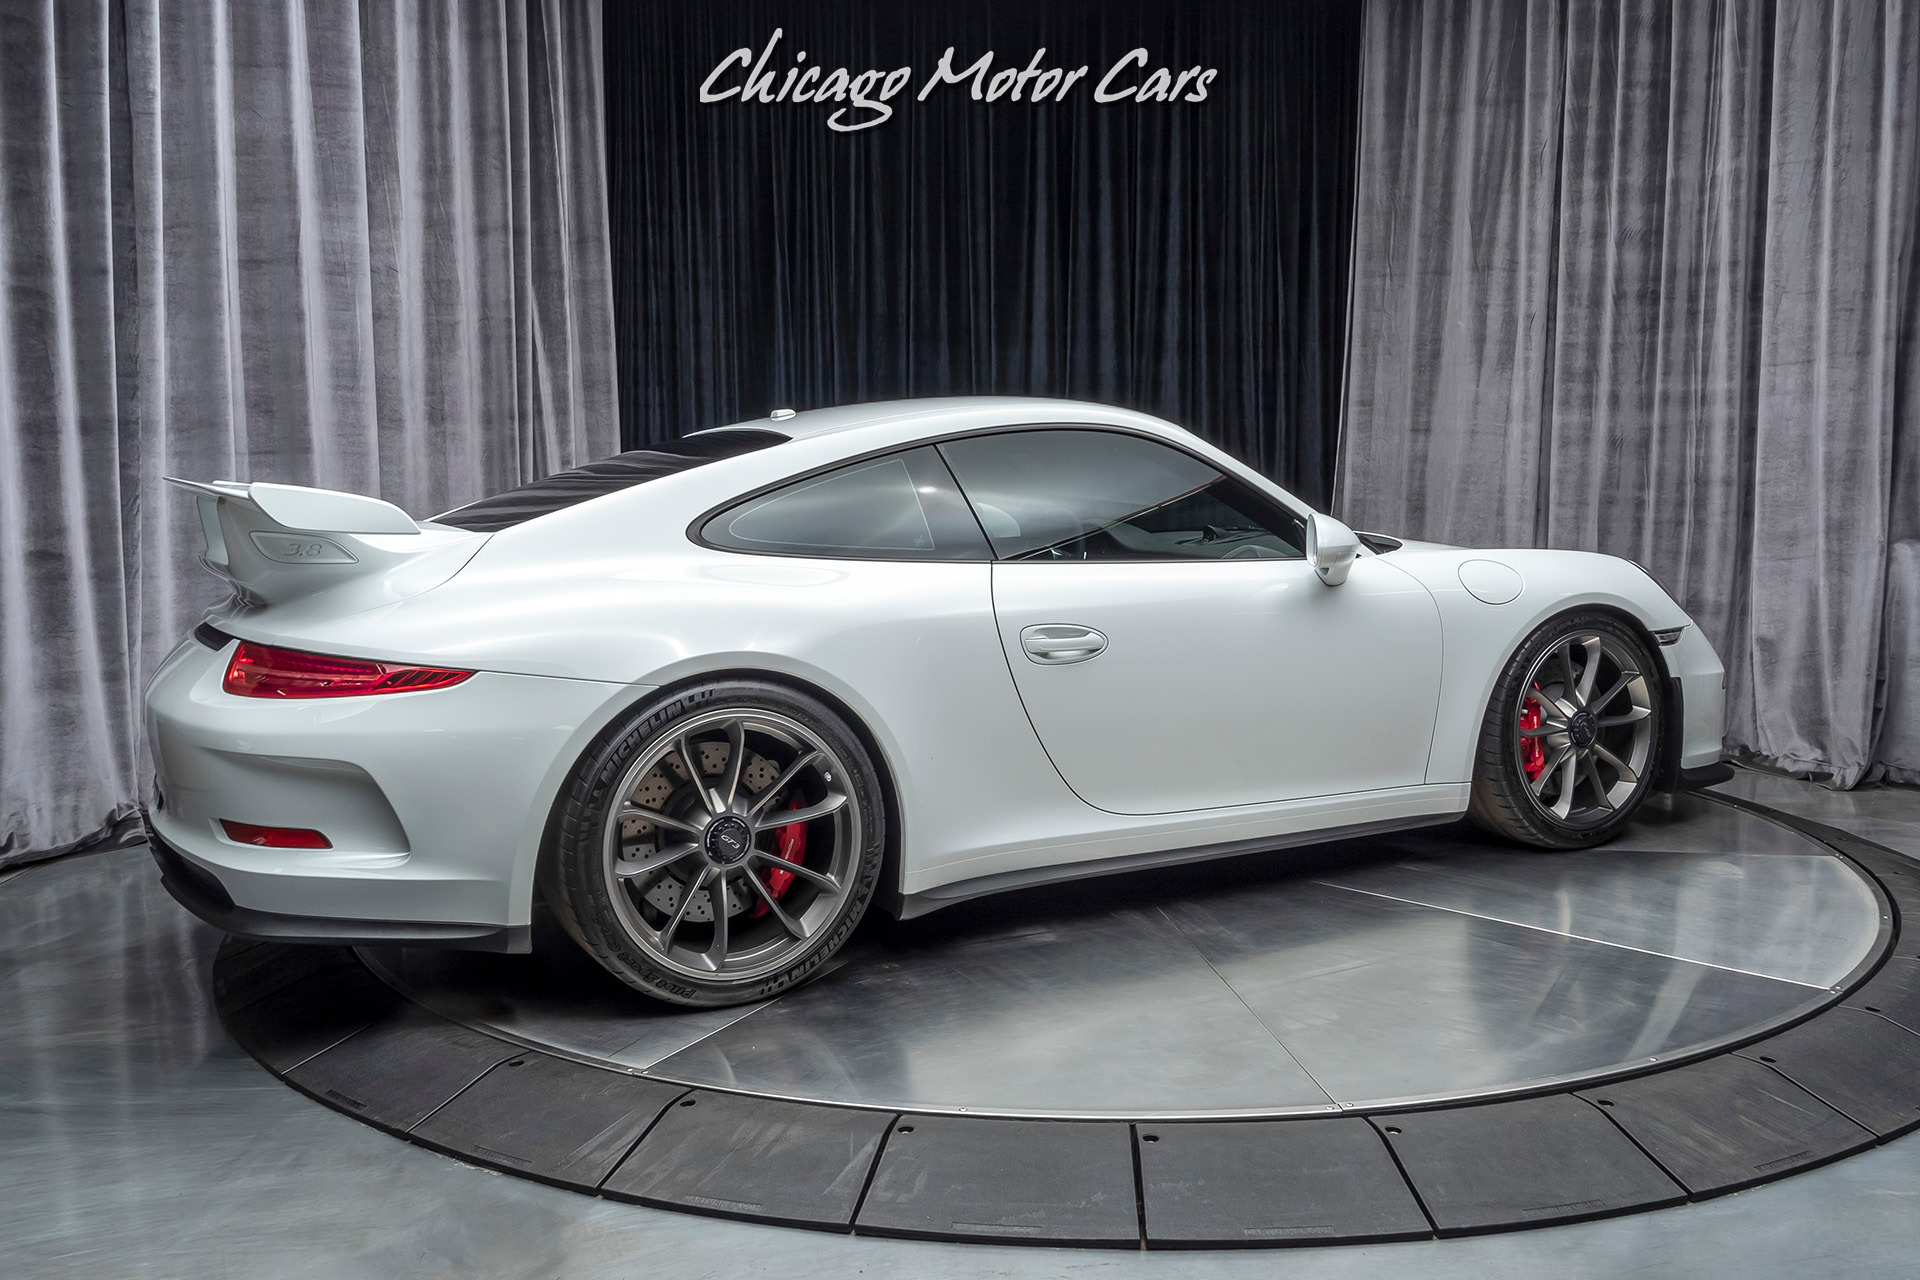 Used-2015-Porsche-911-GT3-Coupe-Upgrades-Serviced-Carbon-Buckets--Warranty